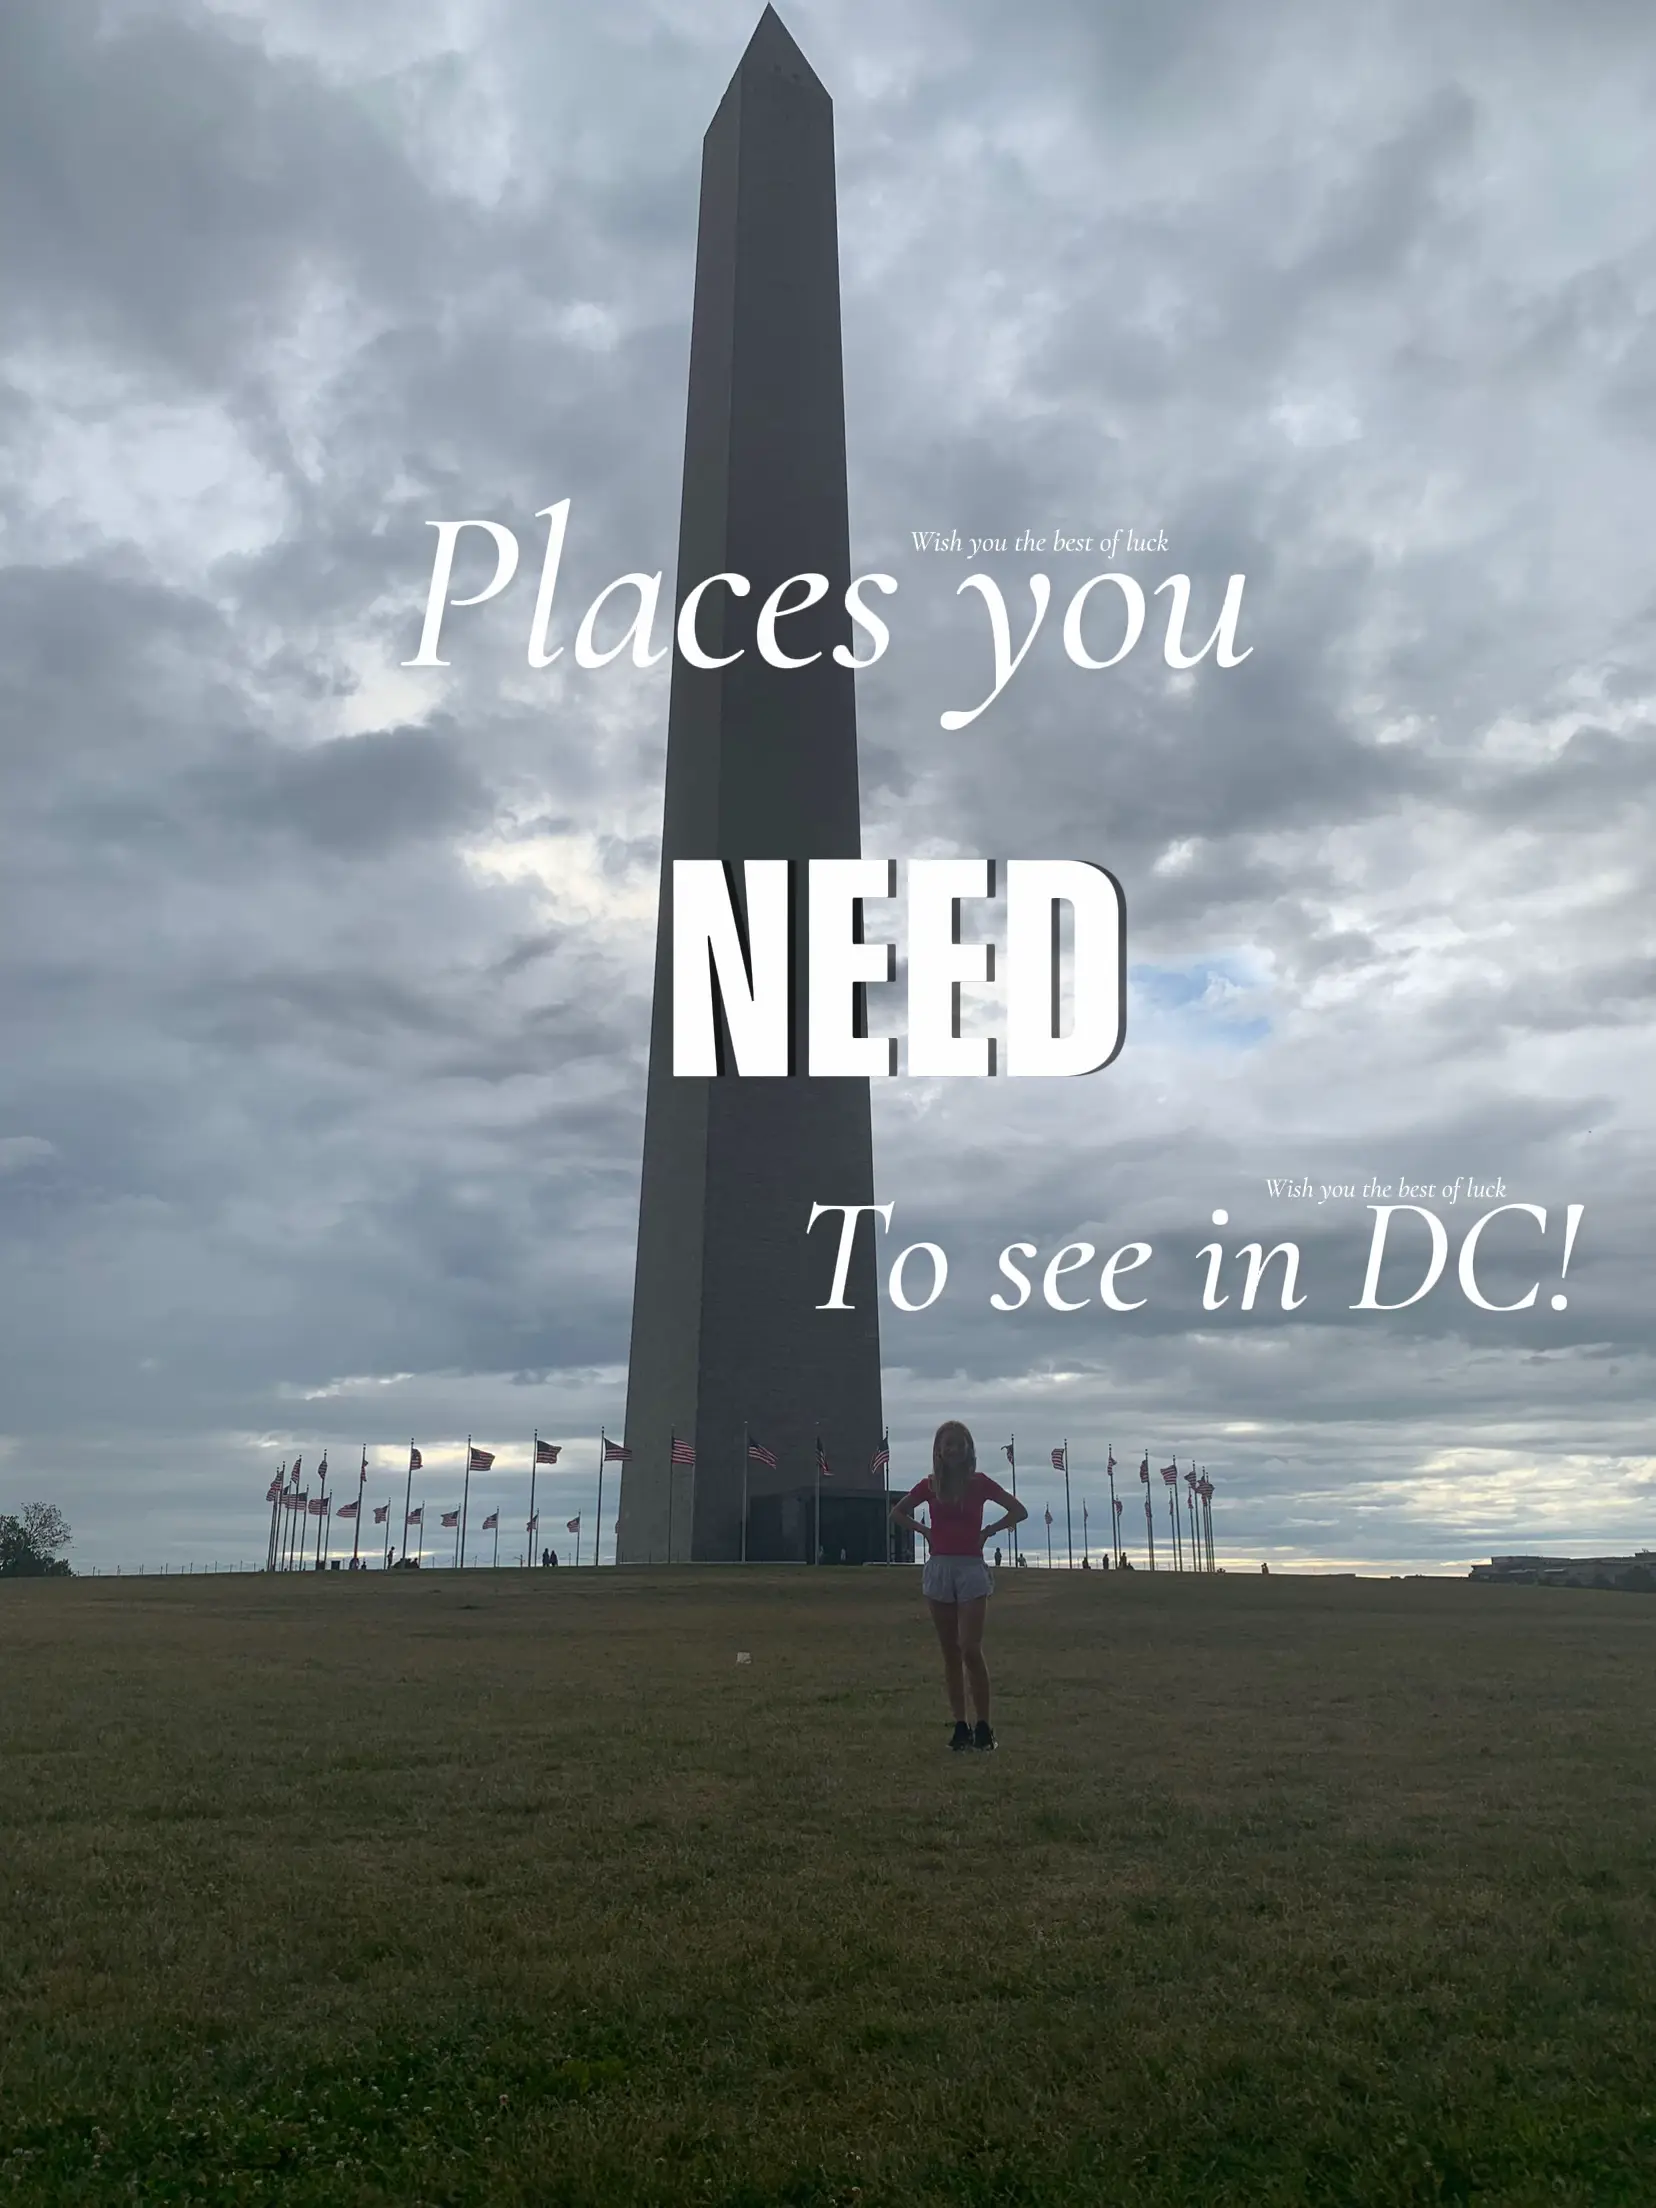  A woman standing in front of the Washington Monument.